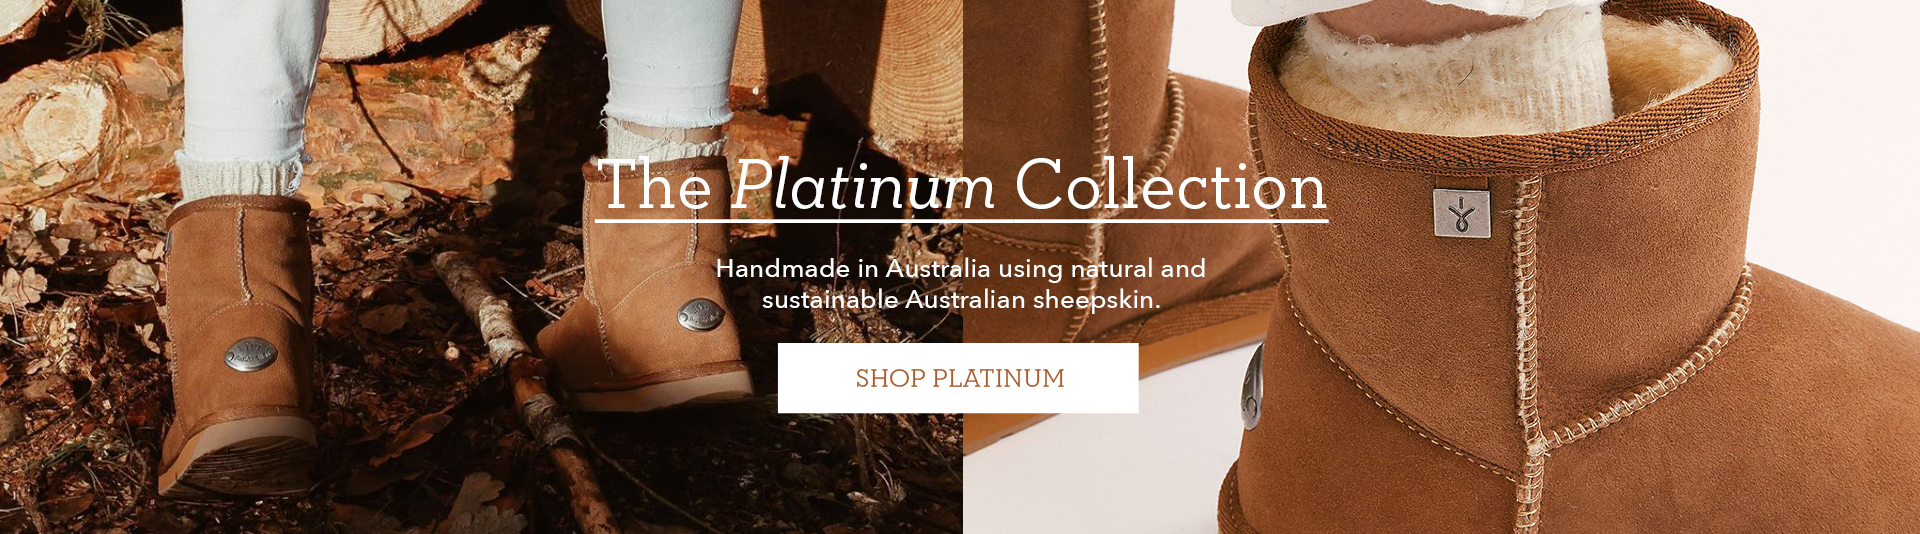 Homepage banner titled 'The Platinum Collection' featuring EMU Australia's Platinum Stinger Mini boots and subtext, 'Handmade in Australia using natural and sustainable Australian sheepskin. SHOP NOW.'